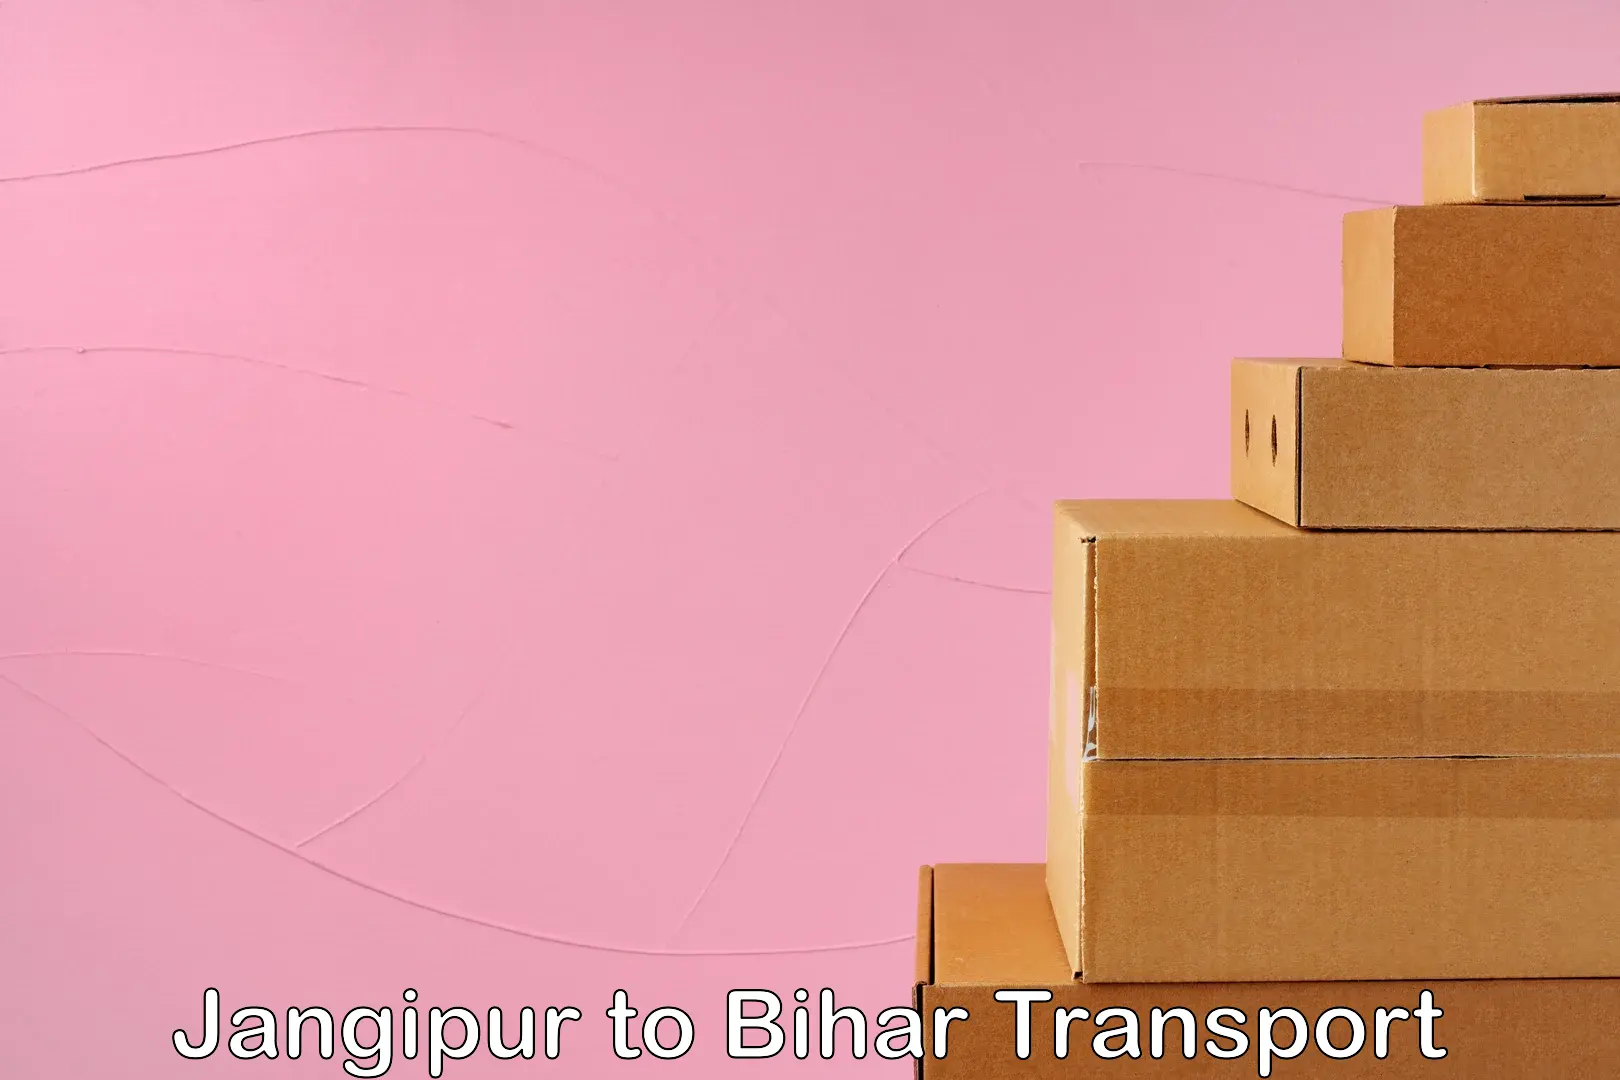 Parcel transport services in Jangipur to Mohiuddin Nagar